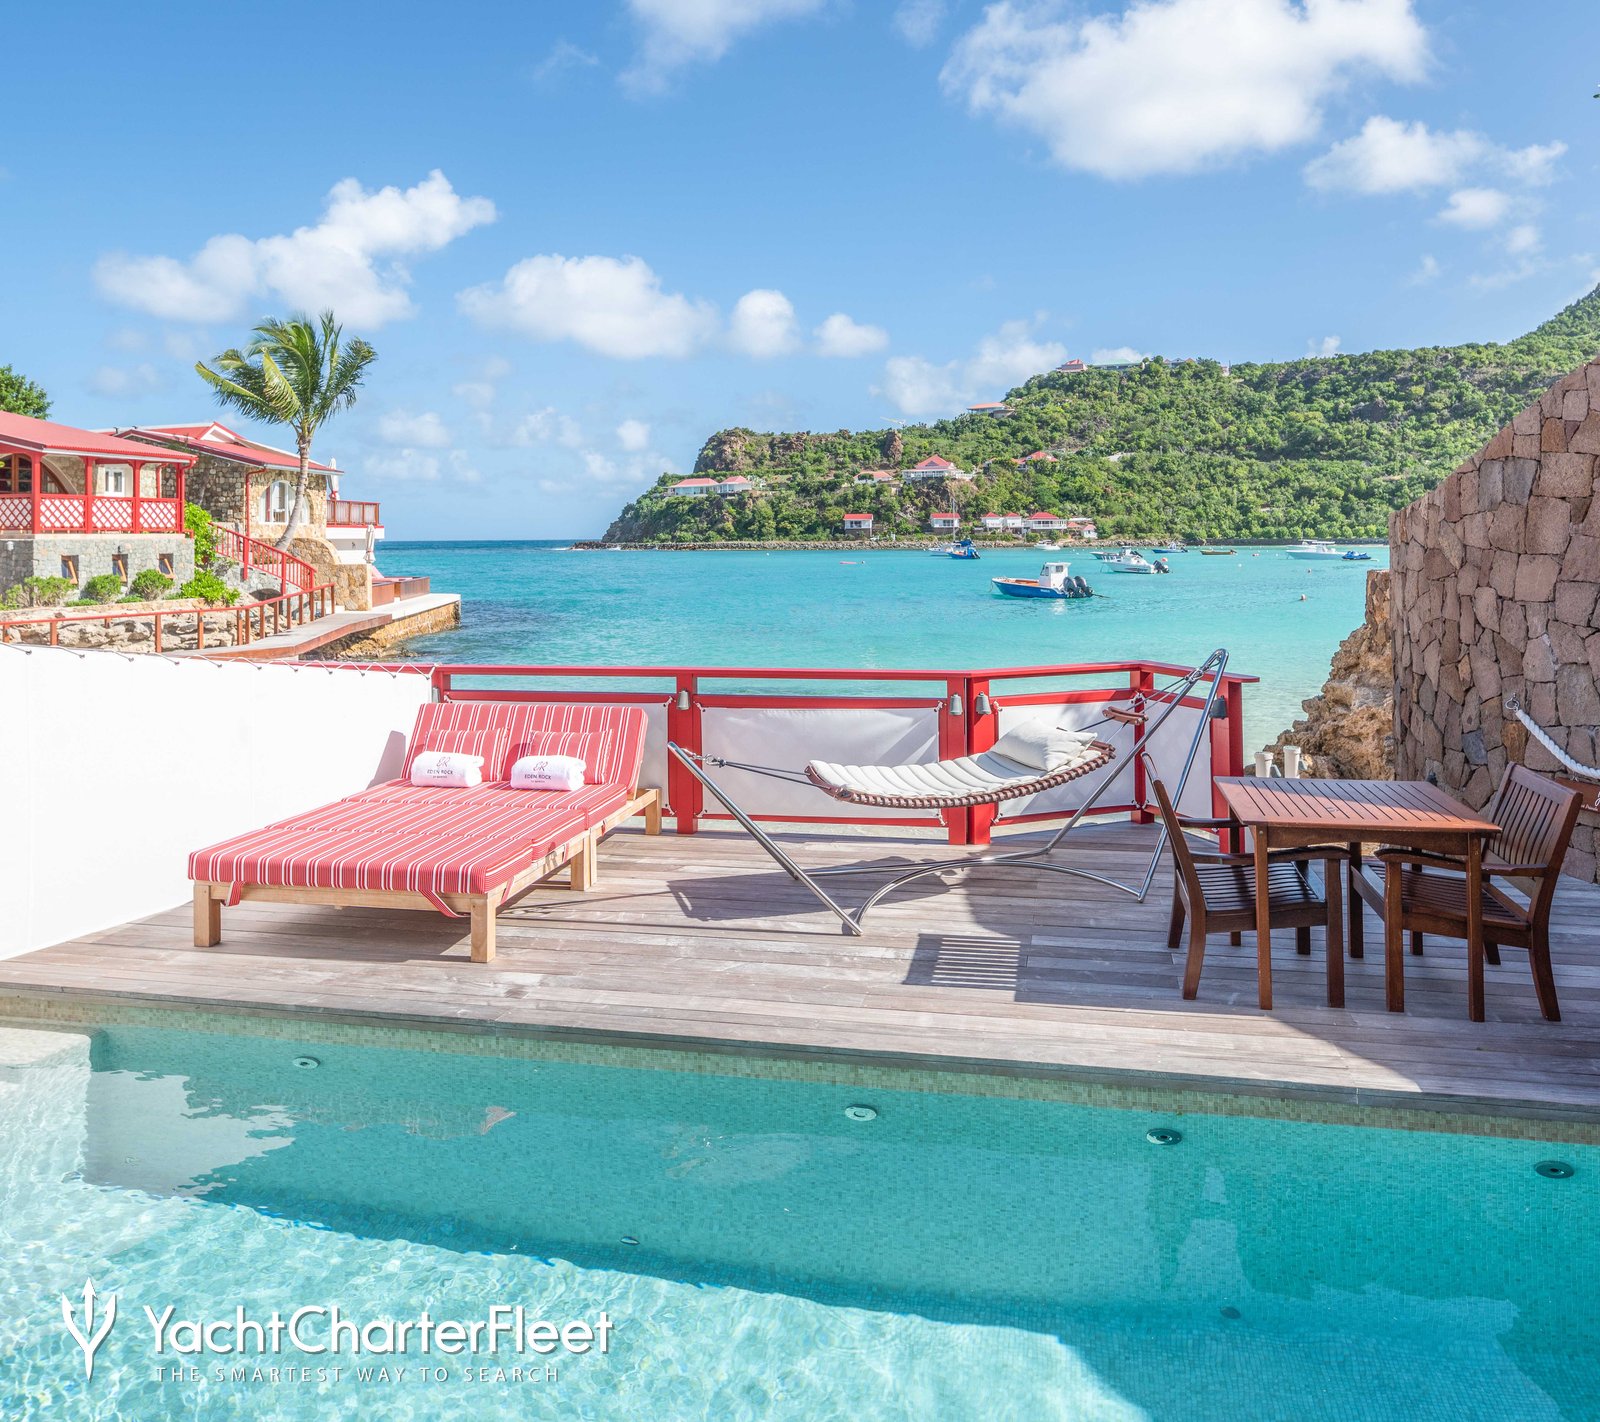 Eden Rock hotel review, St Barth's